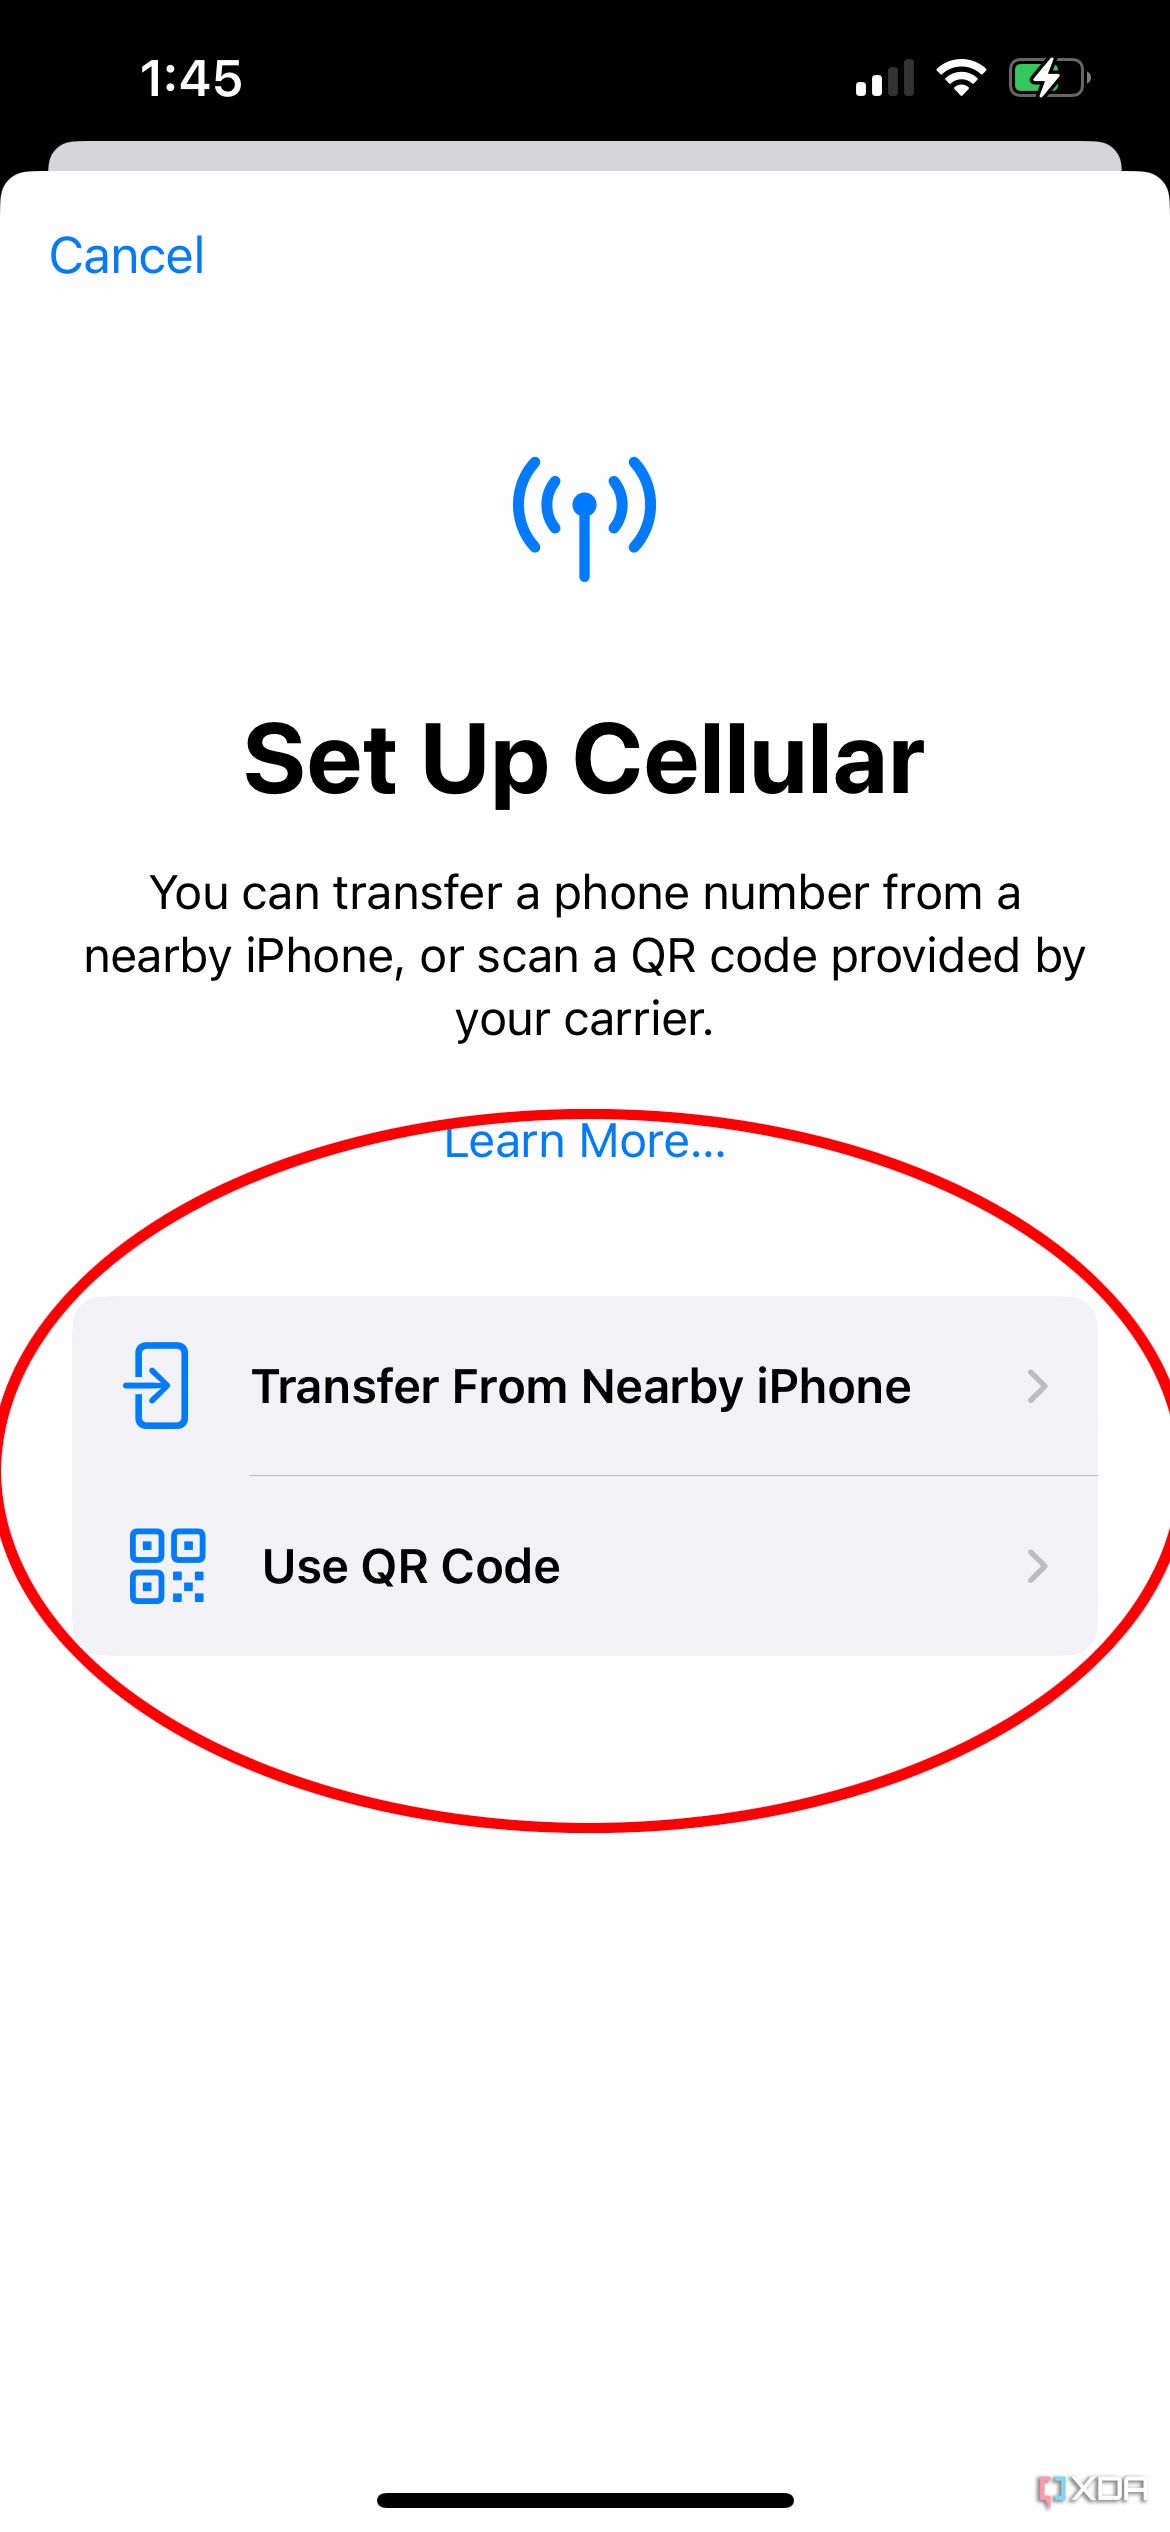 iPhone Set up Cellular menu showing transfer from nearby iPhone or use QR code.